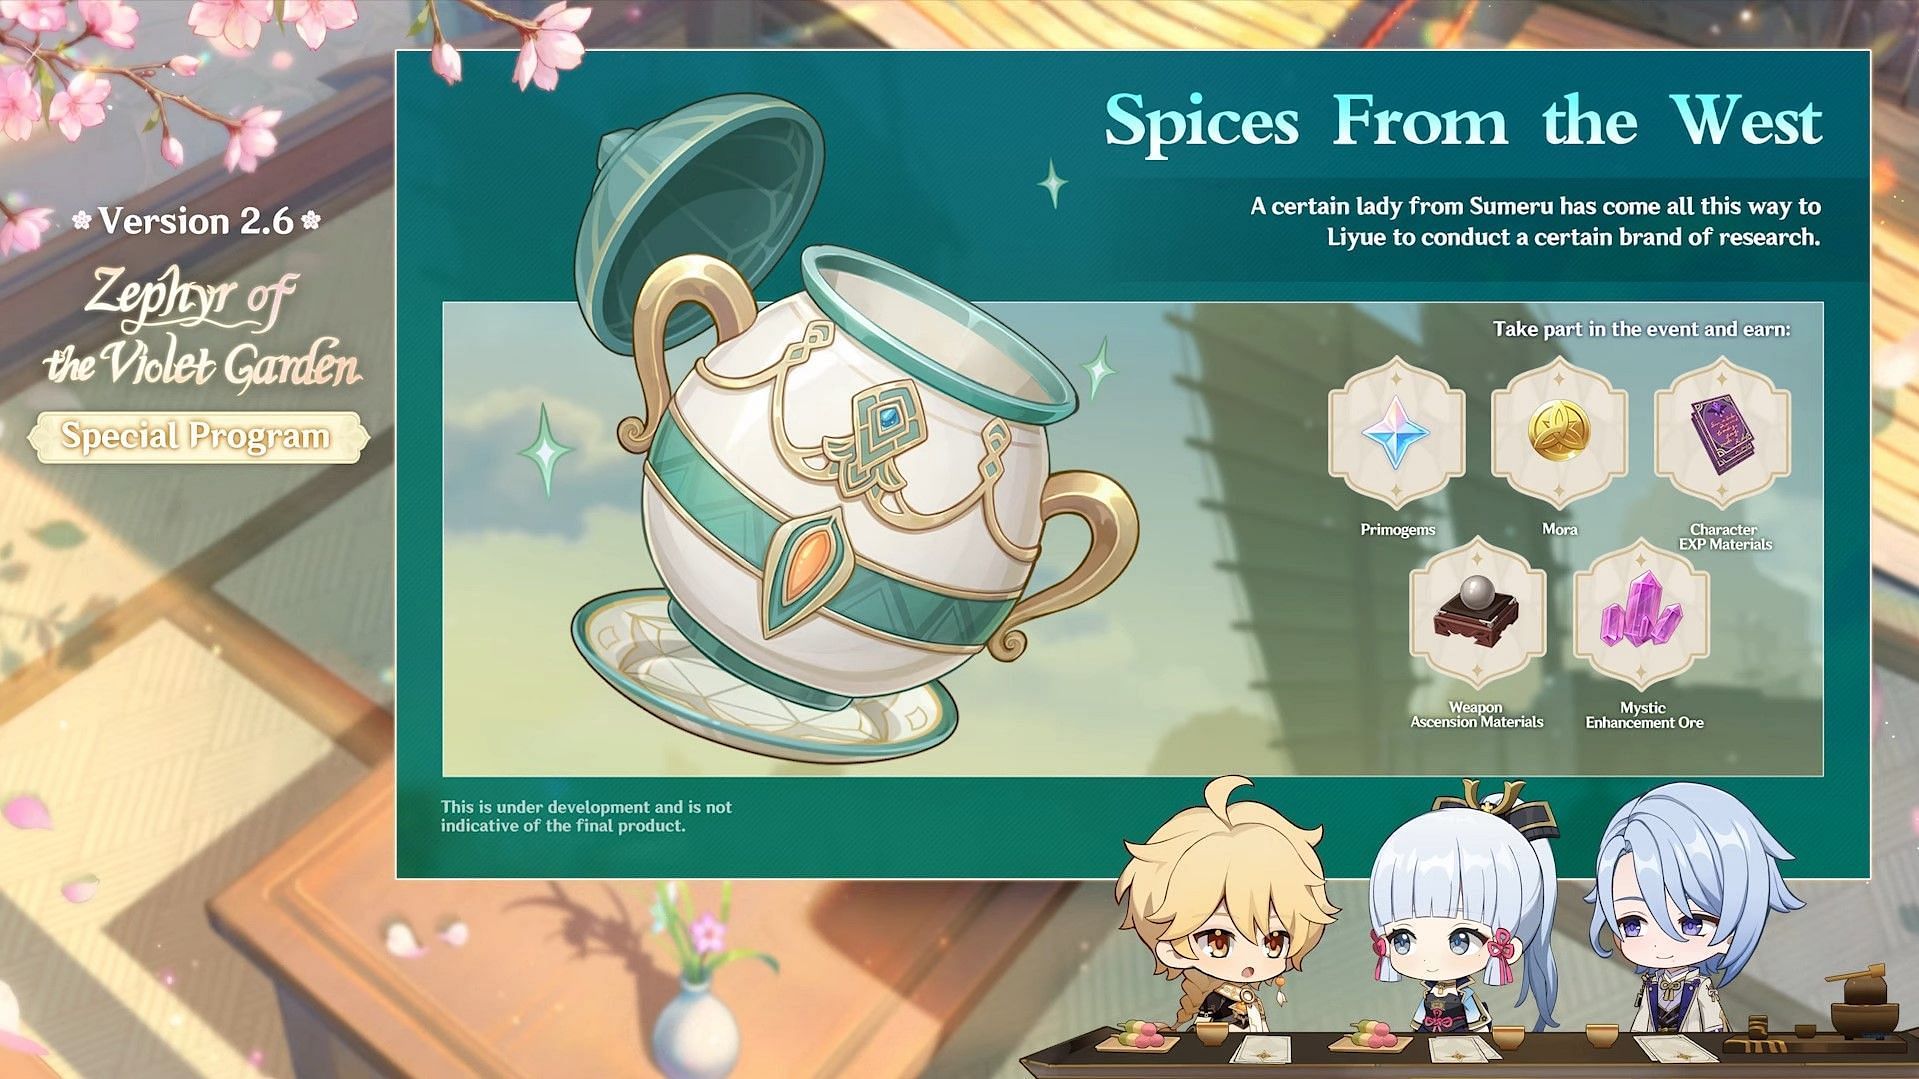 Spices From the West (Image via miHoYo)